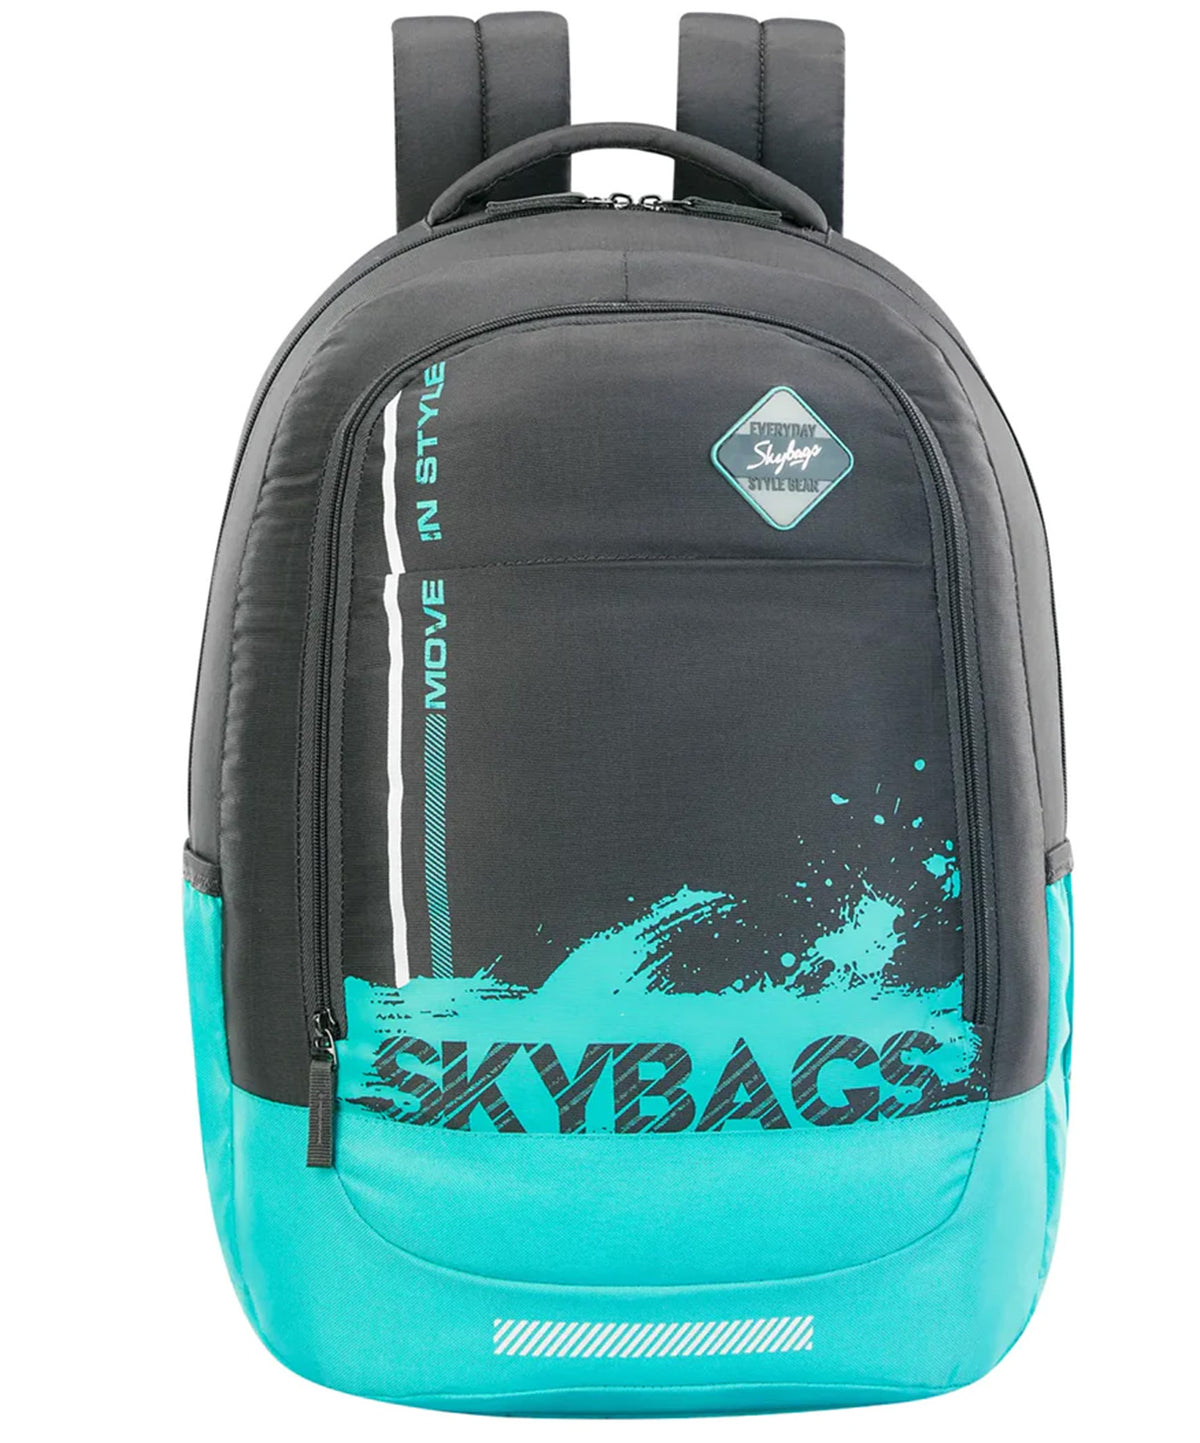 Skybags, Bff 3 Grey 18.5" Backpack, BFF3GY